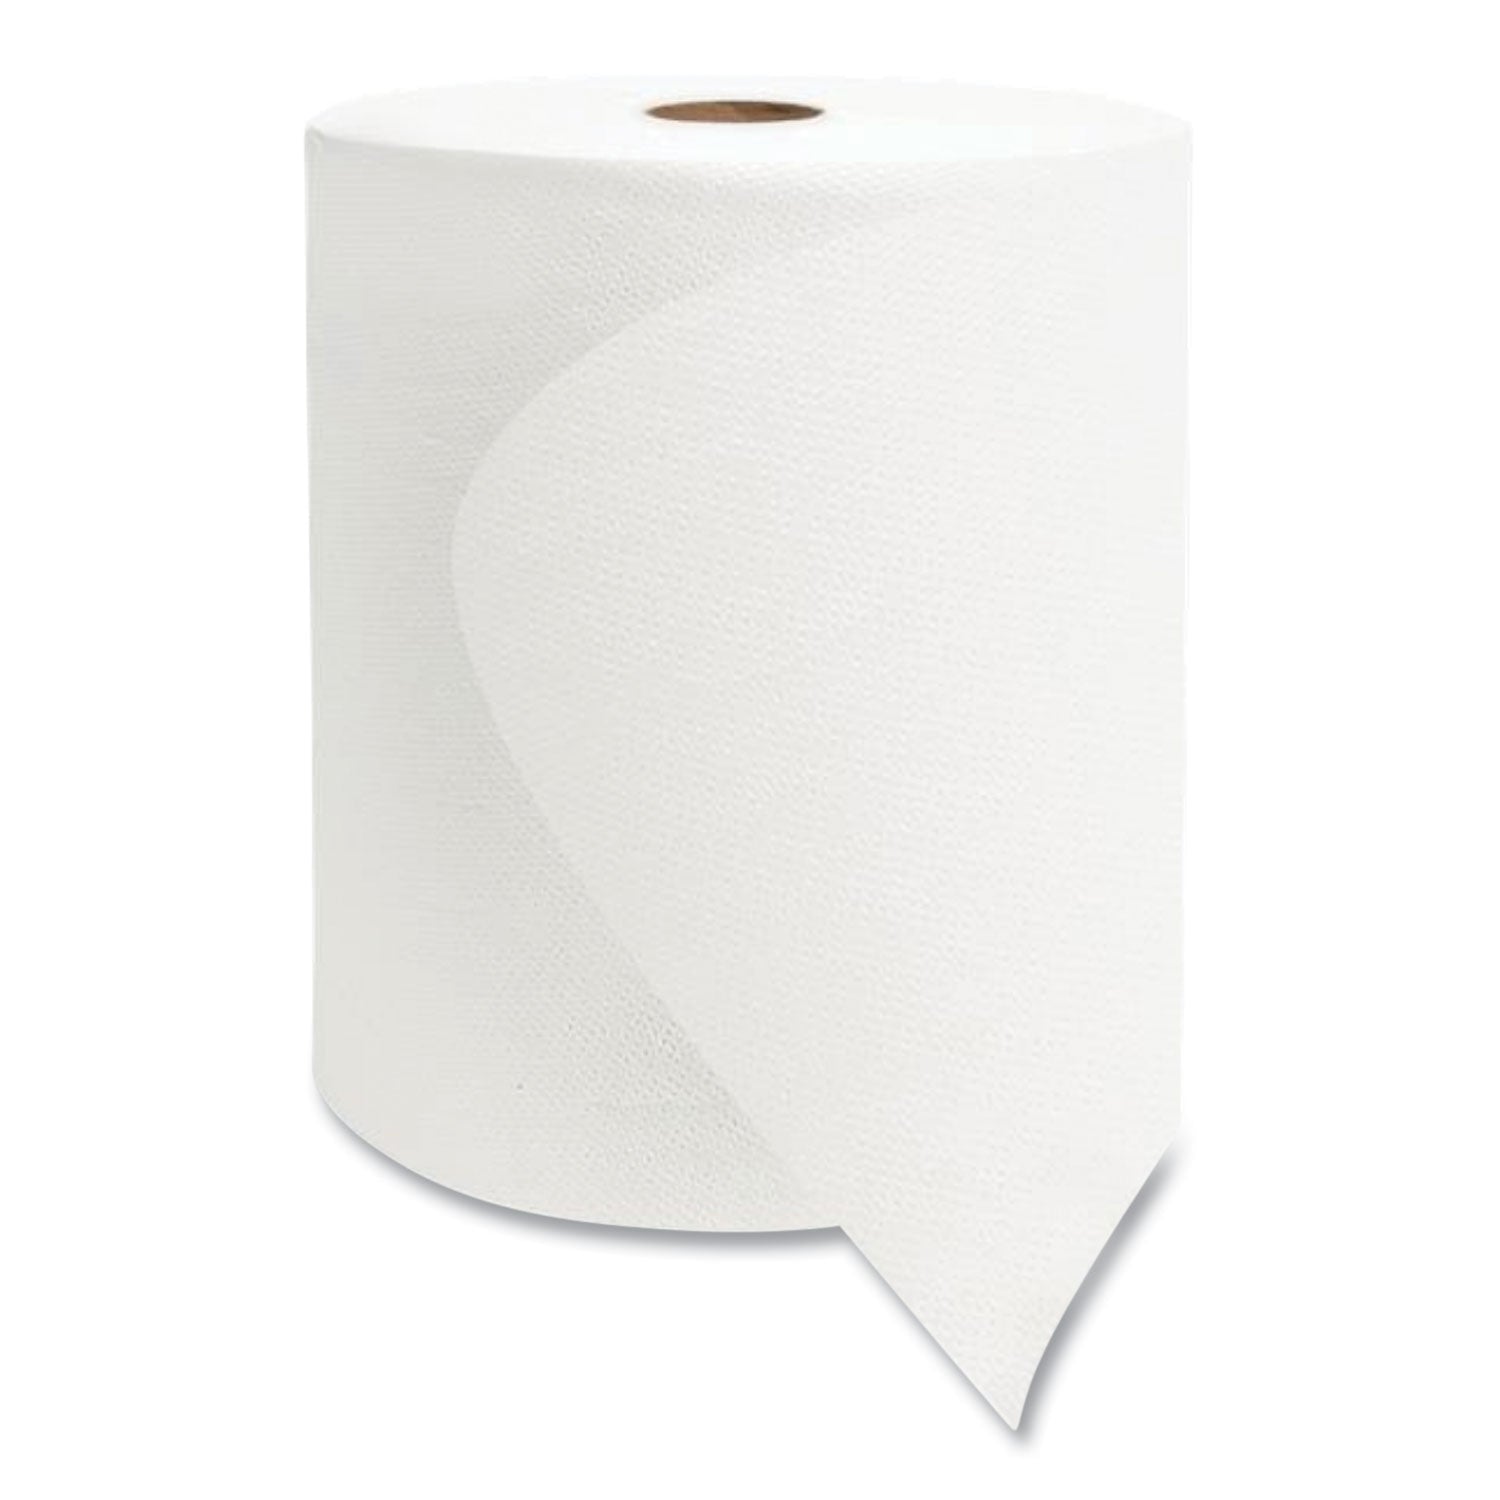 valay-universal-tad-roll-towels-1-ply-8-x-600-ft-white-6-rolls-carton_morvt9158 - 1